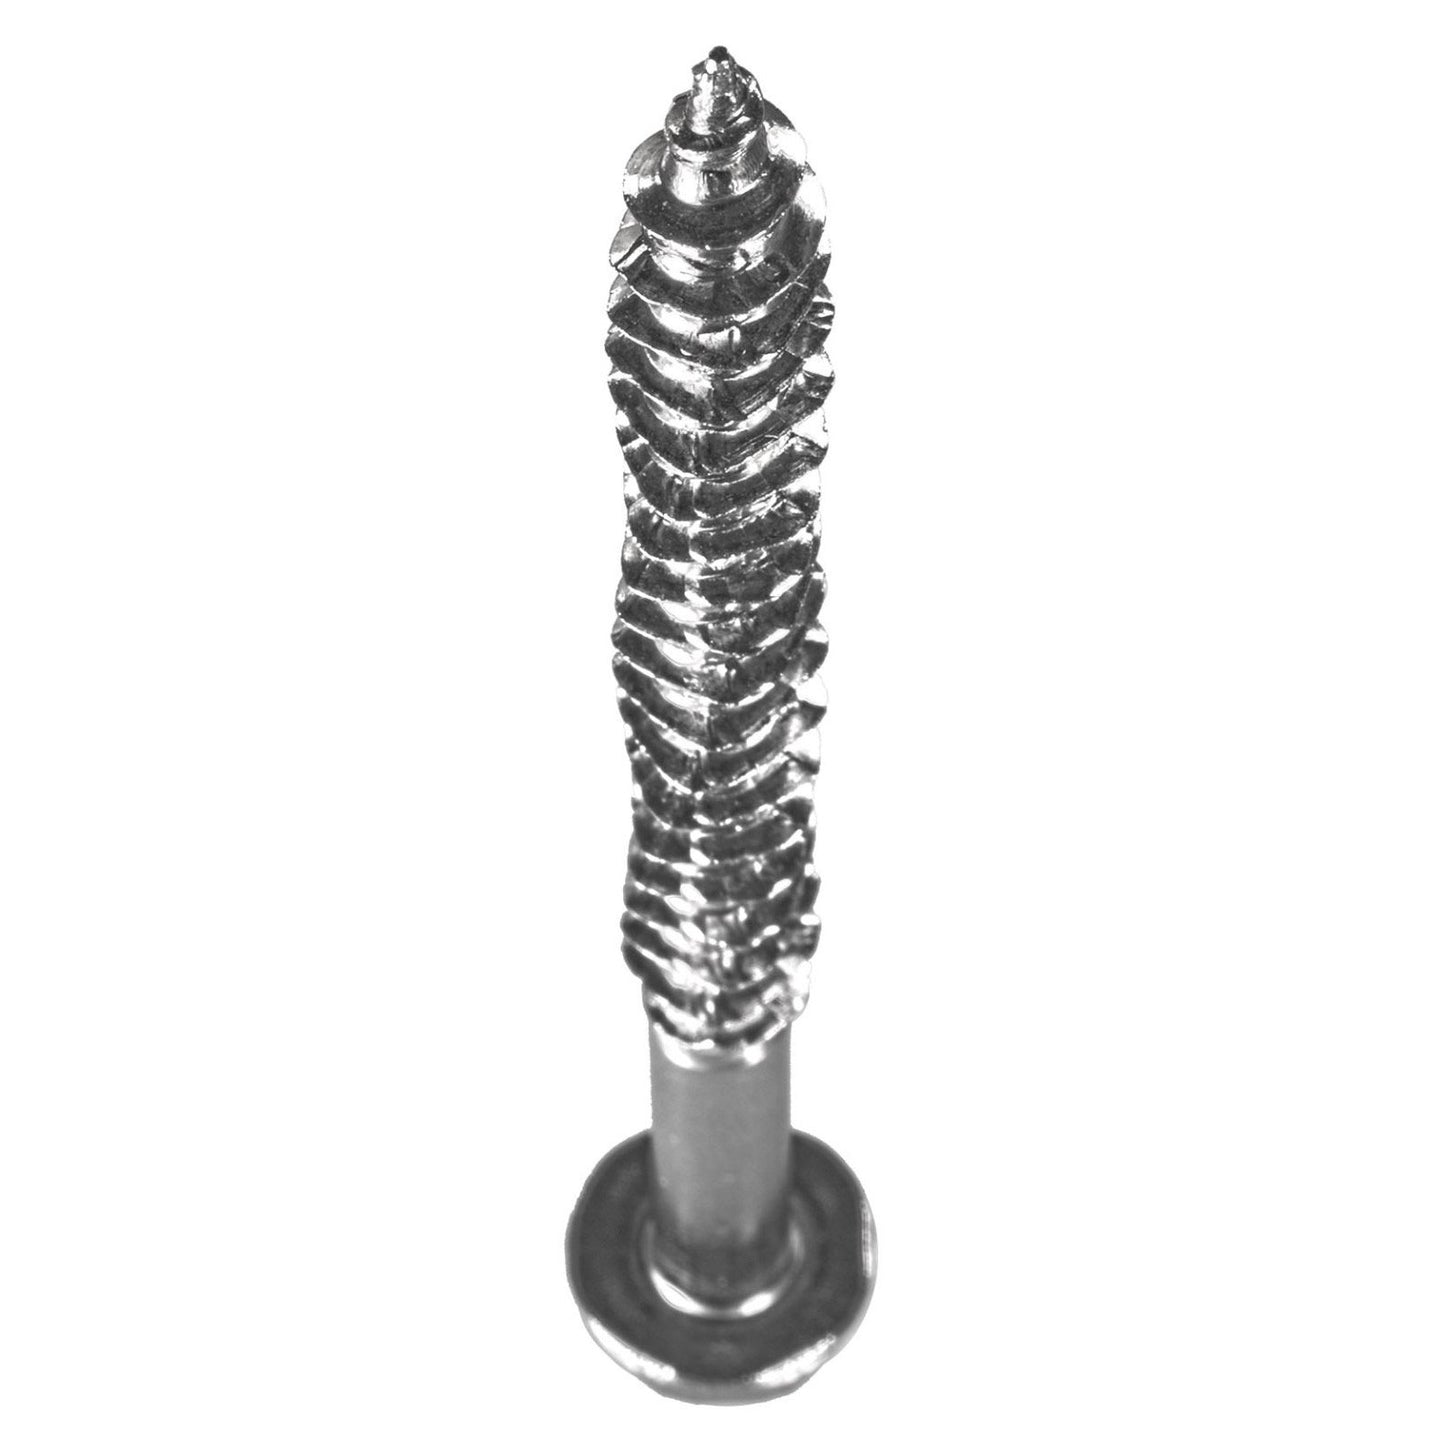 0276 inch x 10 inch StrongTie SDWH TimberHex Screw 316 Stainless Steel Pkg 5